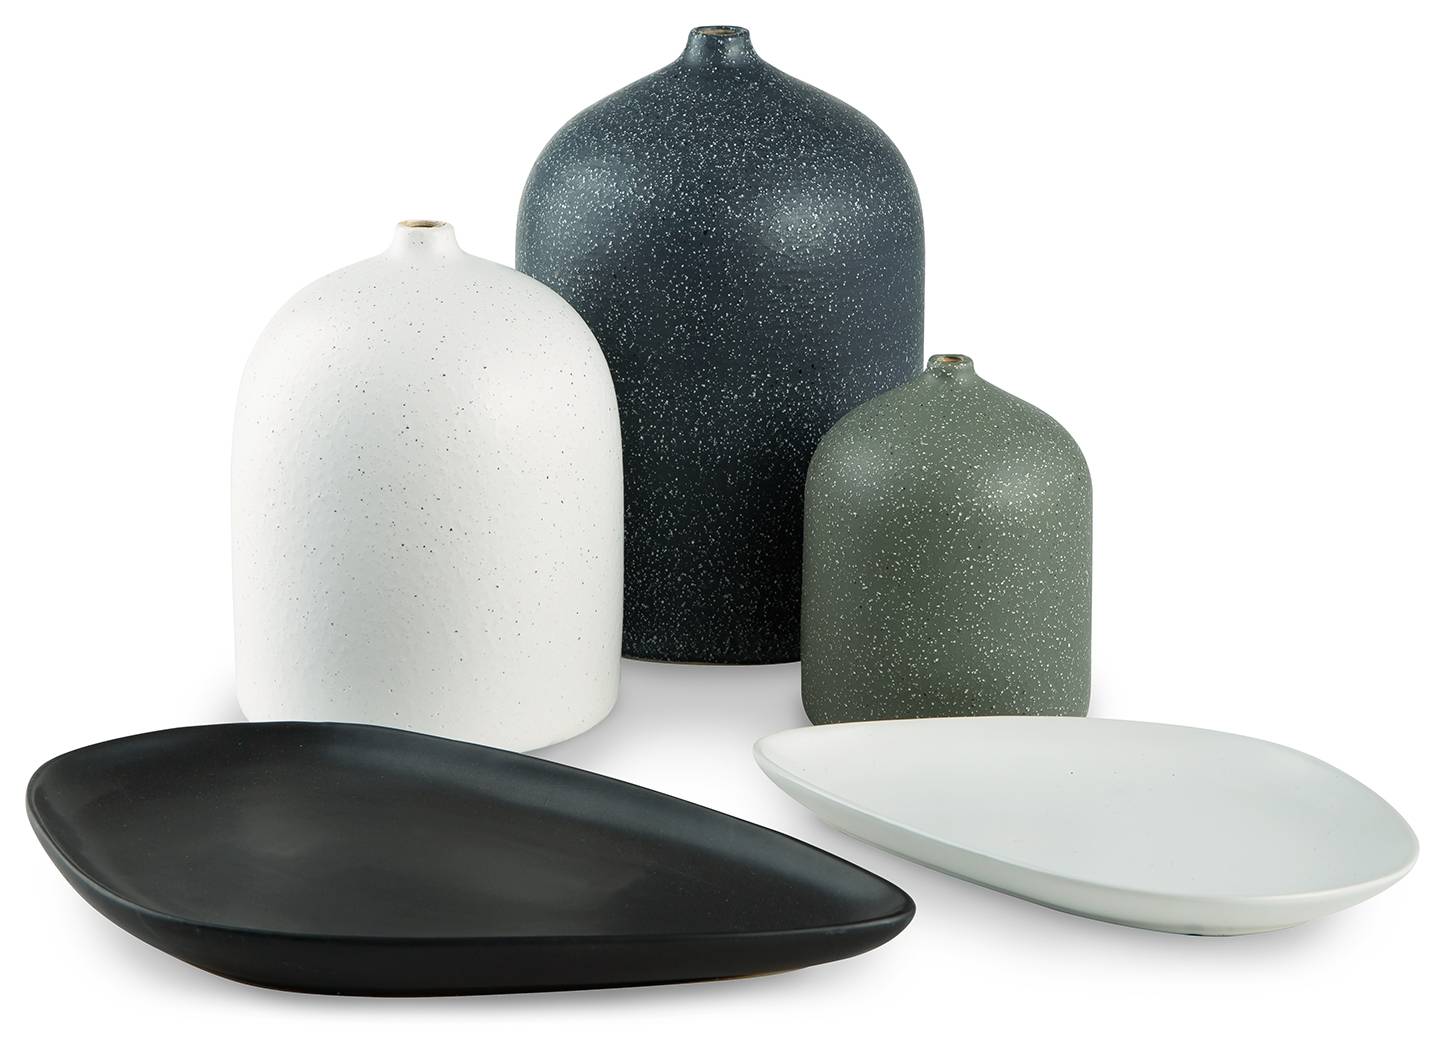 A collection of neutral colour vases and dishes.